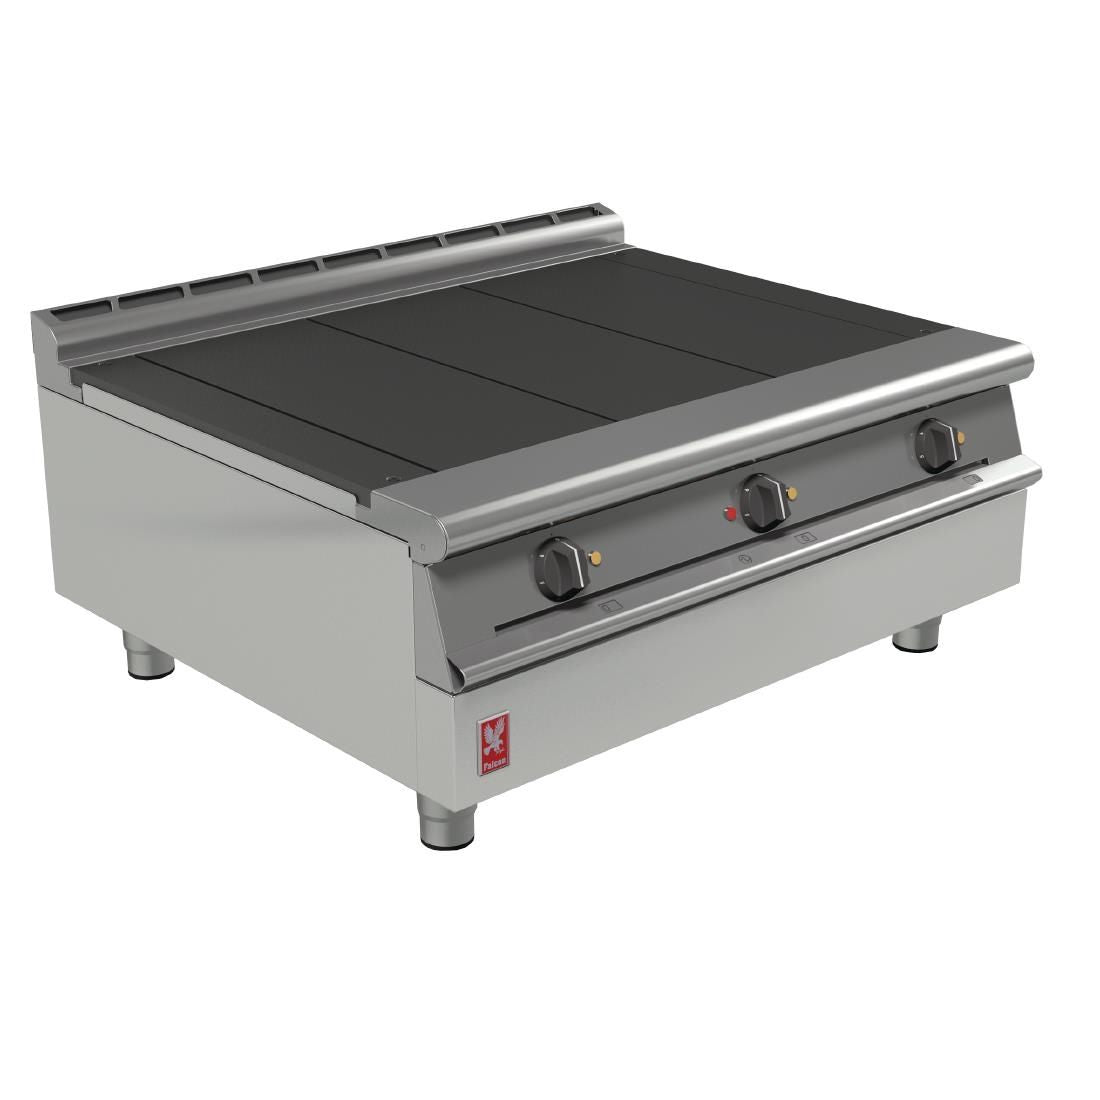 Falcon Dominator Plus 3 Hotplate Boiling Top E3121 JD Catering Equipment Solutions Ltd